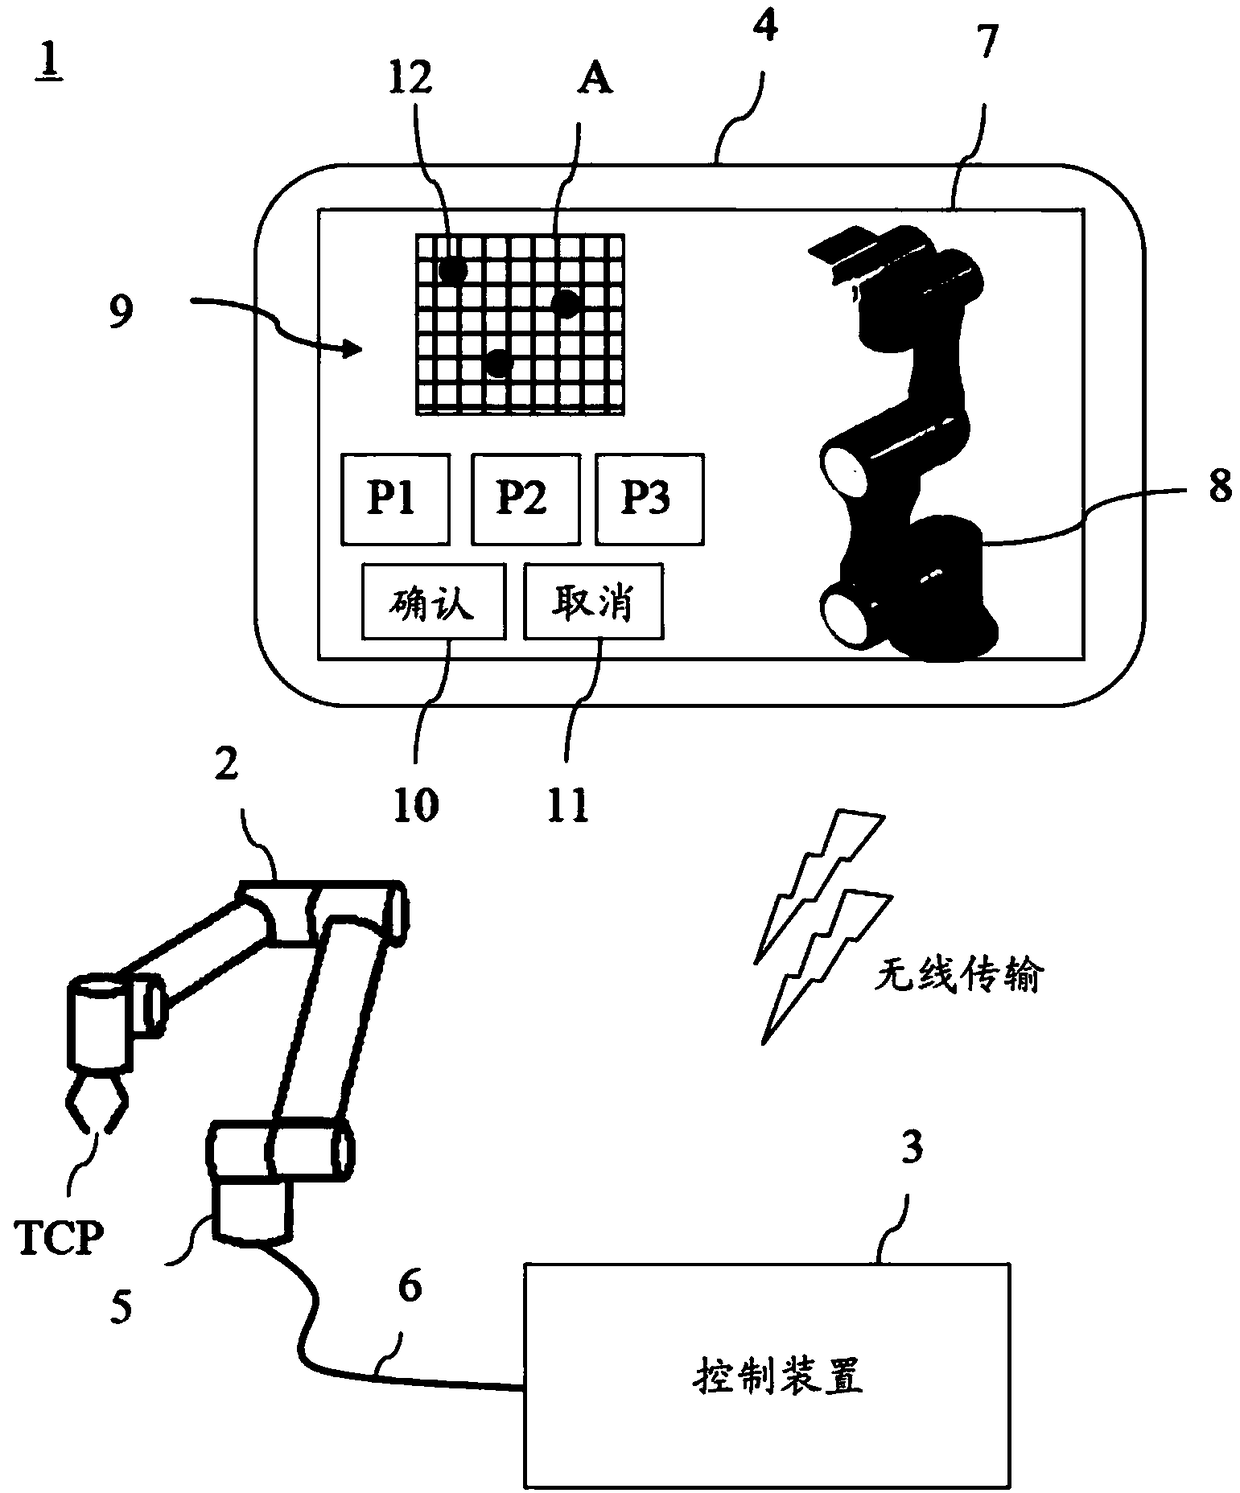 Method for dividing working area of robot